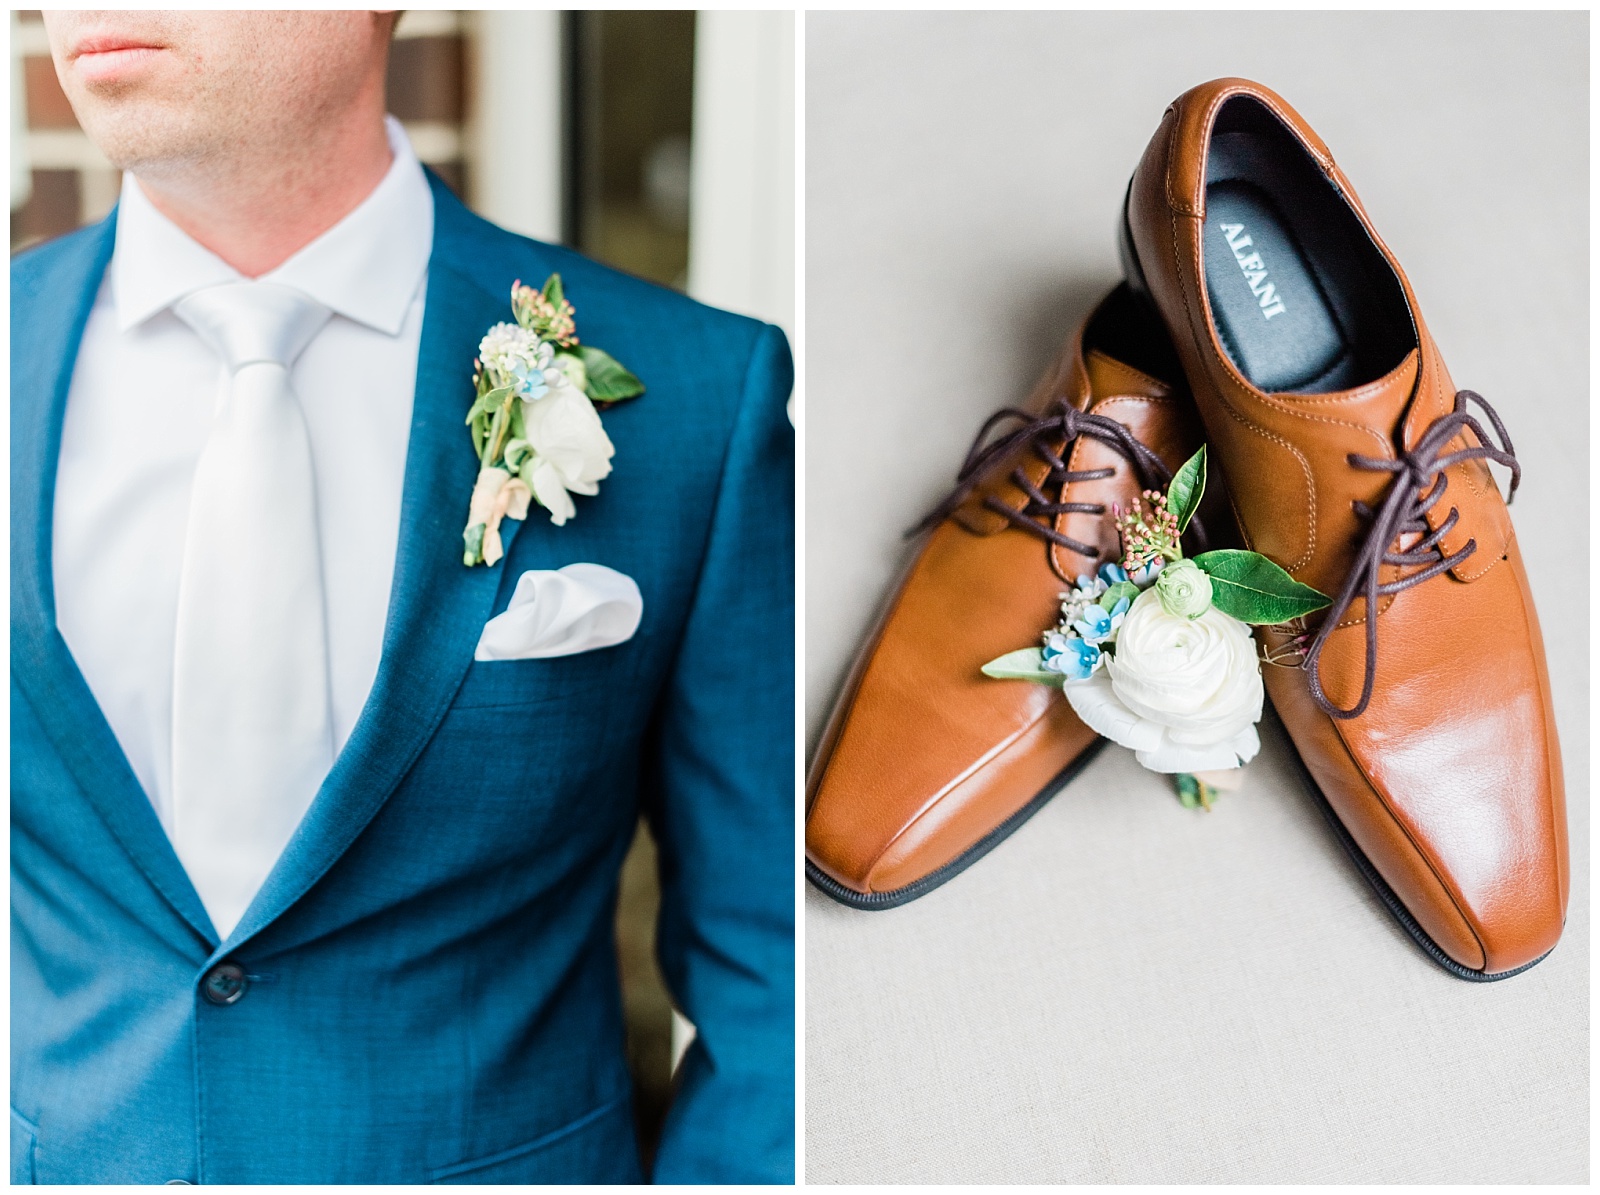 Close up of groom's boutonniere on his jacket, and with his shoes.